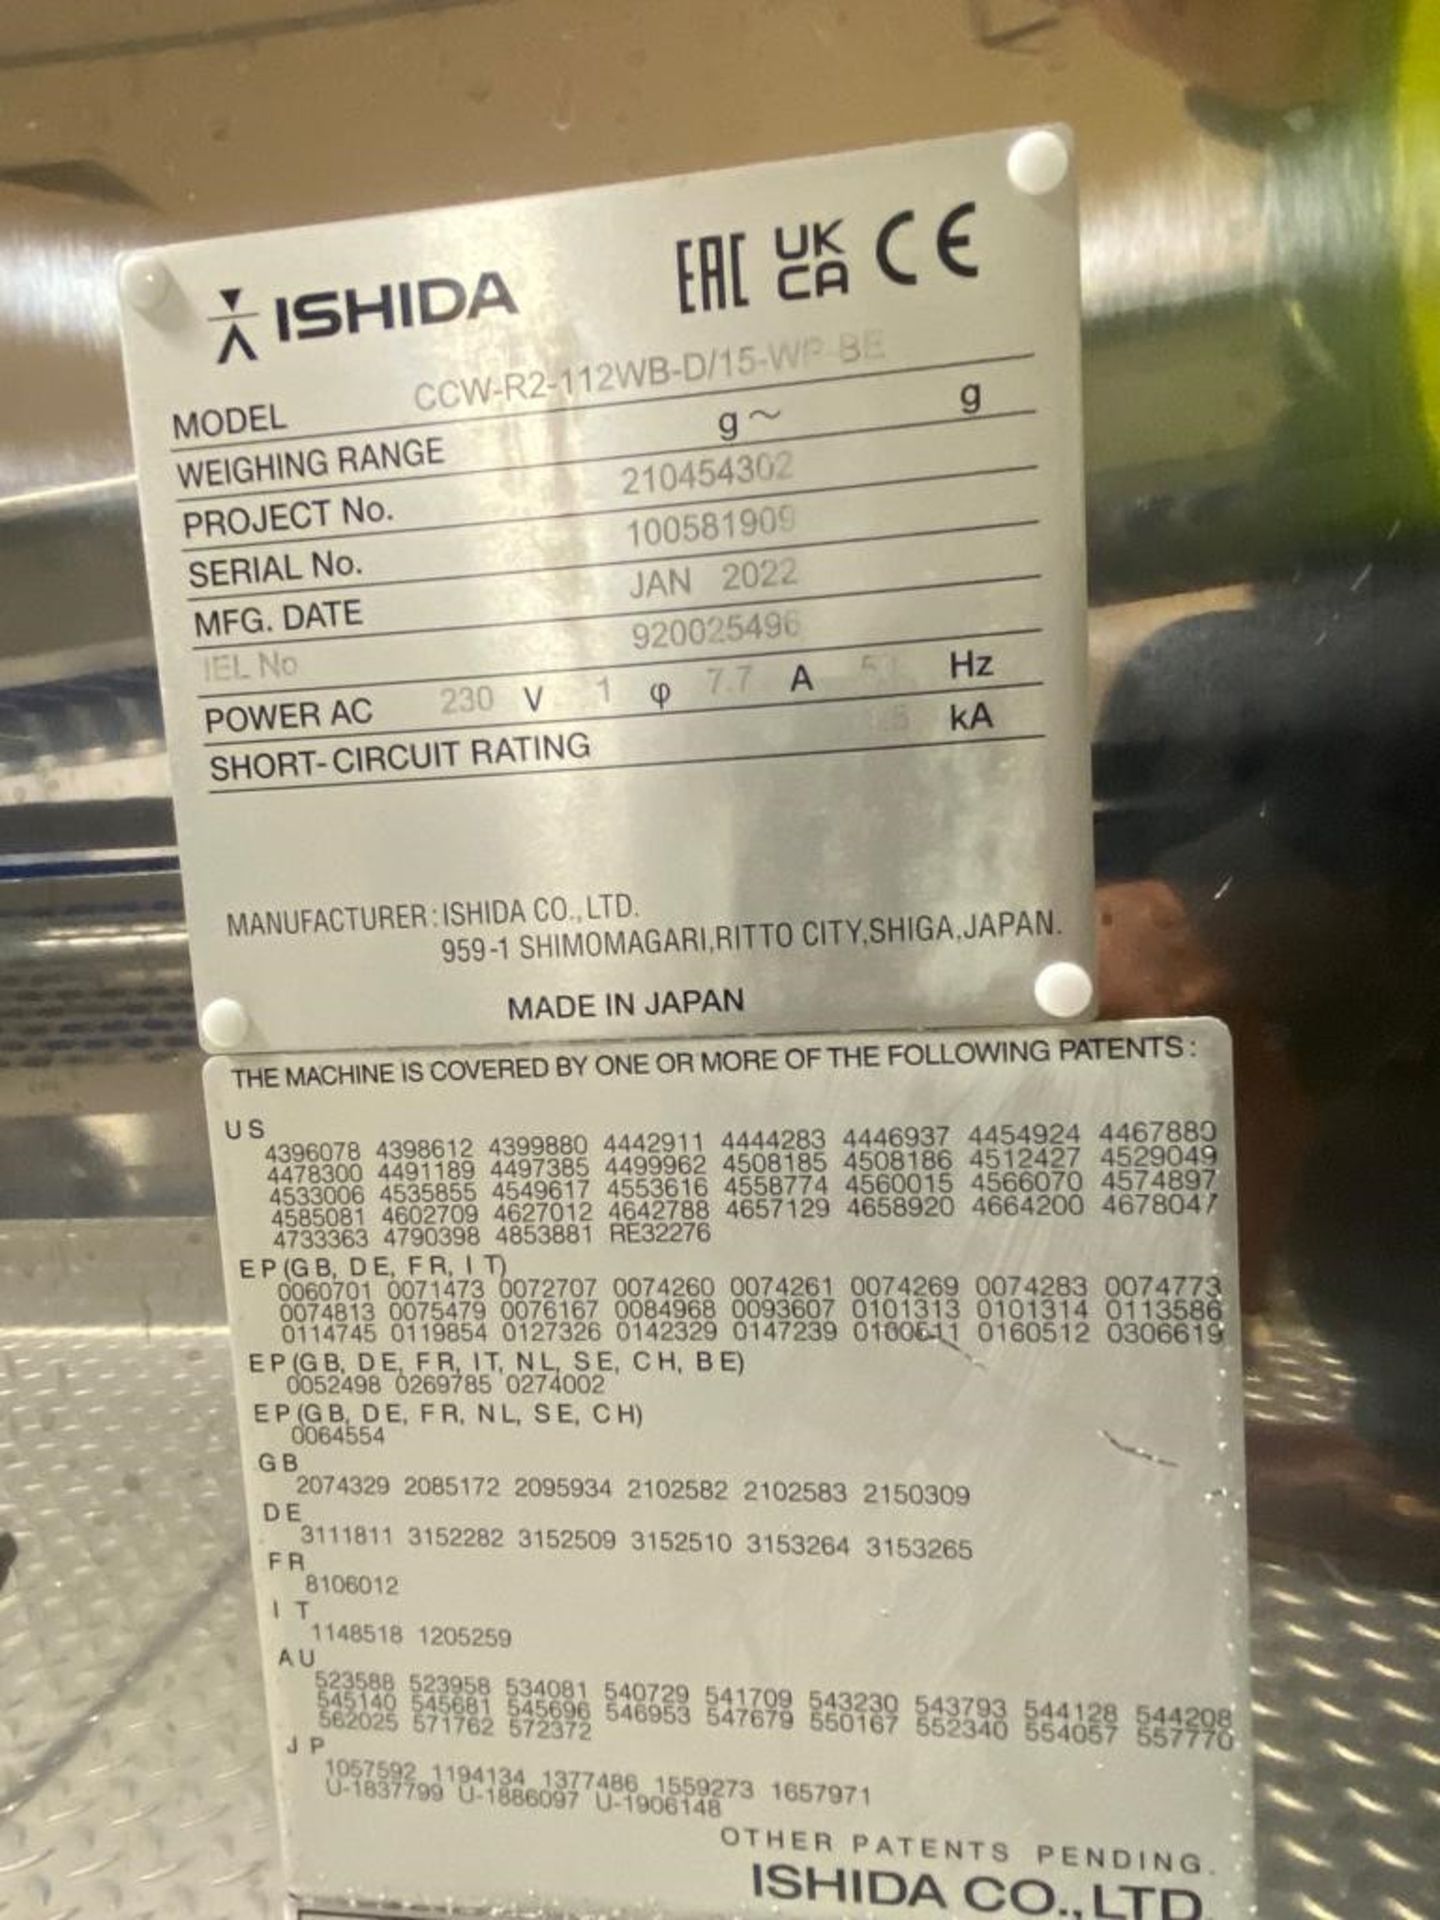 Ishida High speed 12 Head fresh fruit weighing system including access platform, product tray - Image 9 of 10